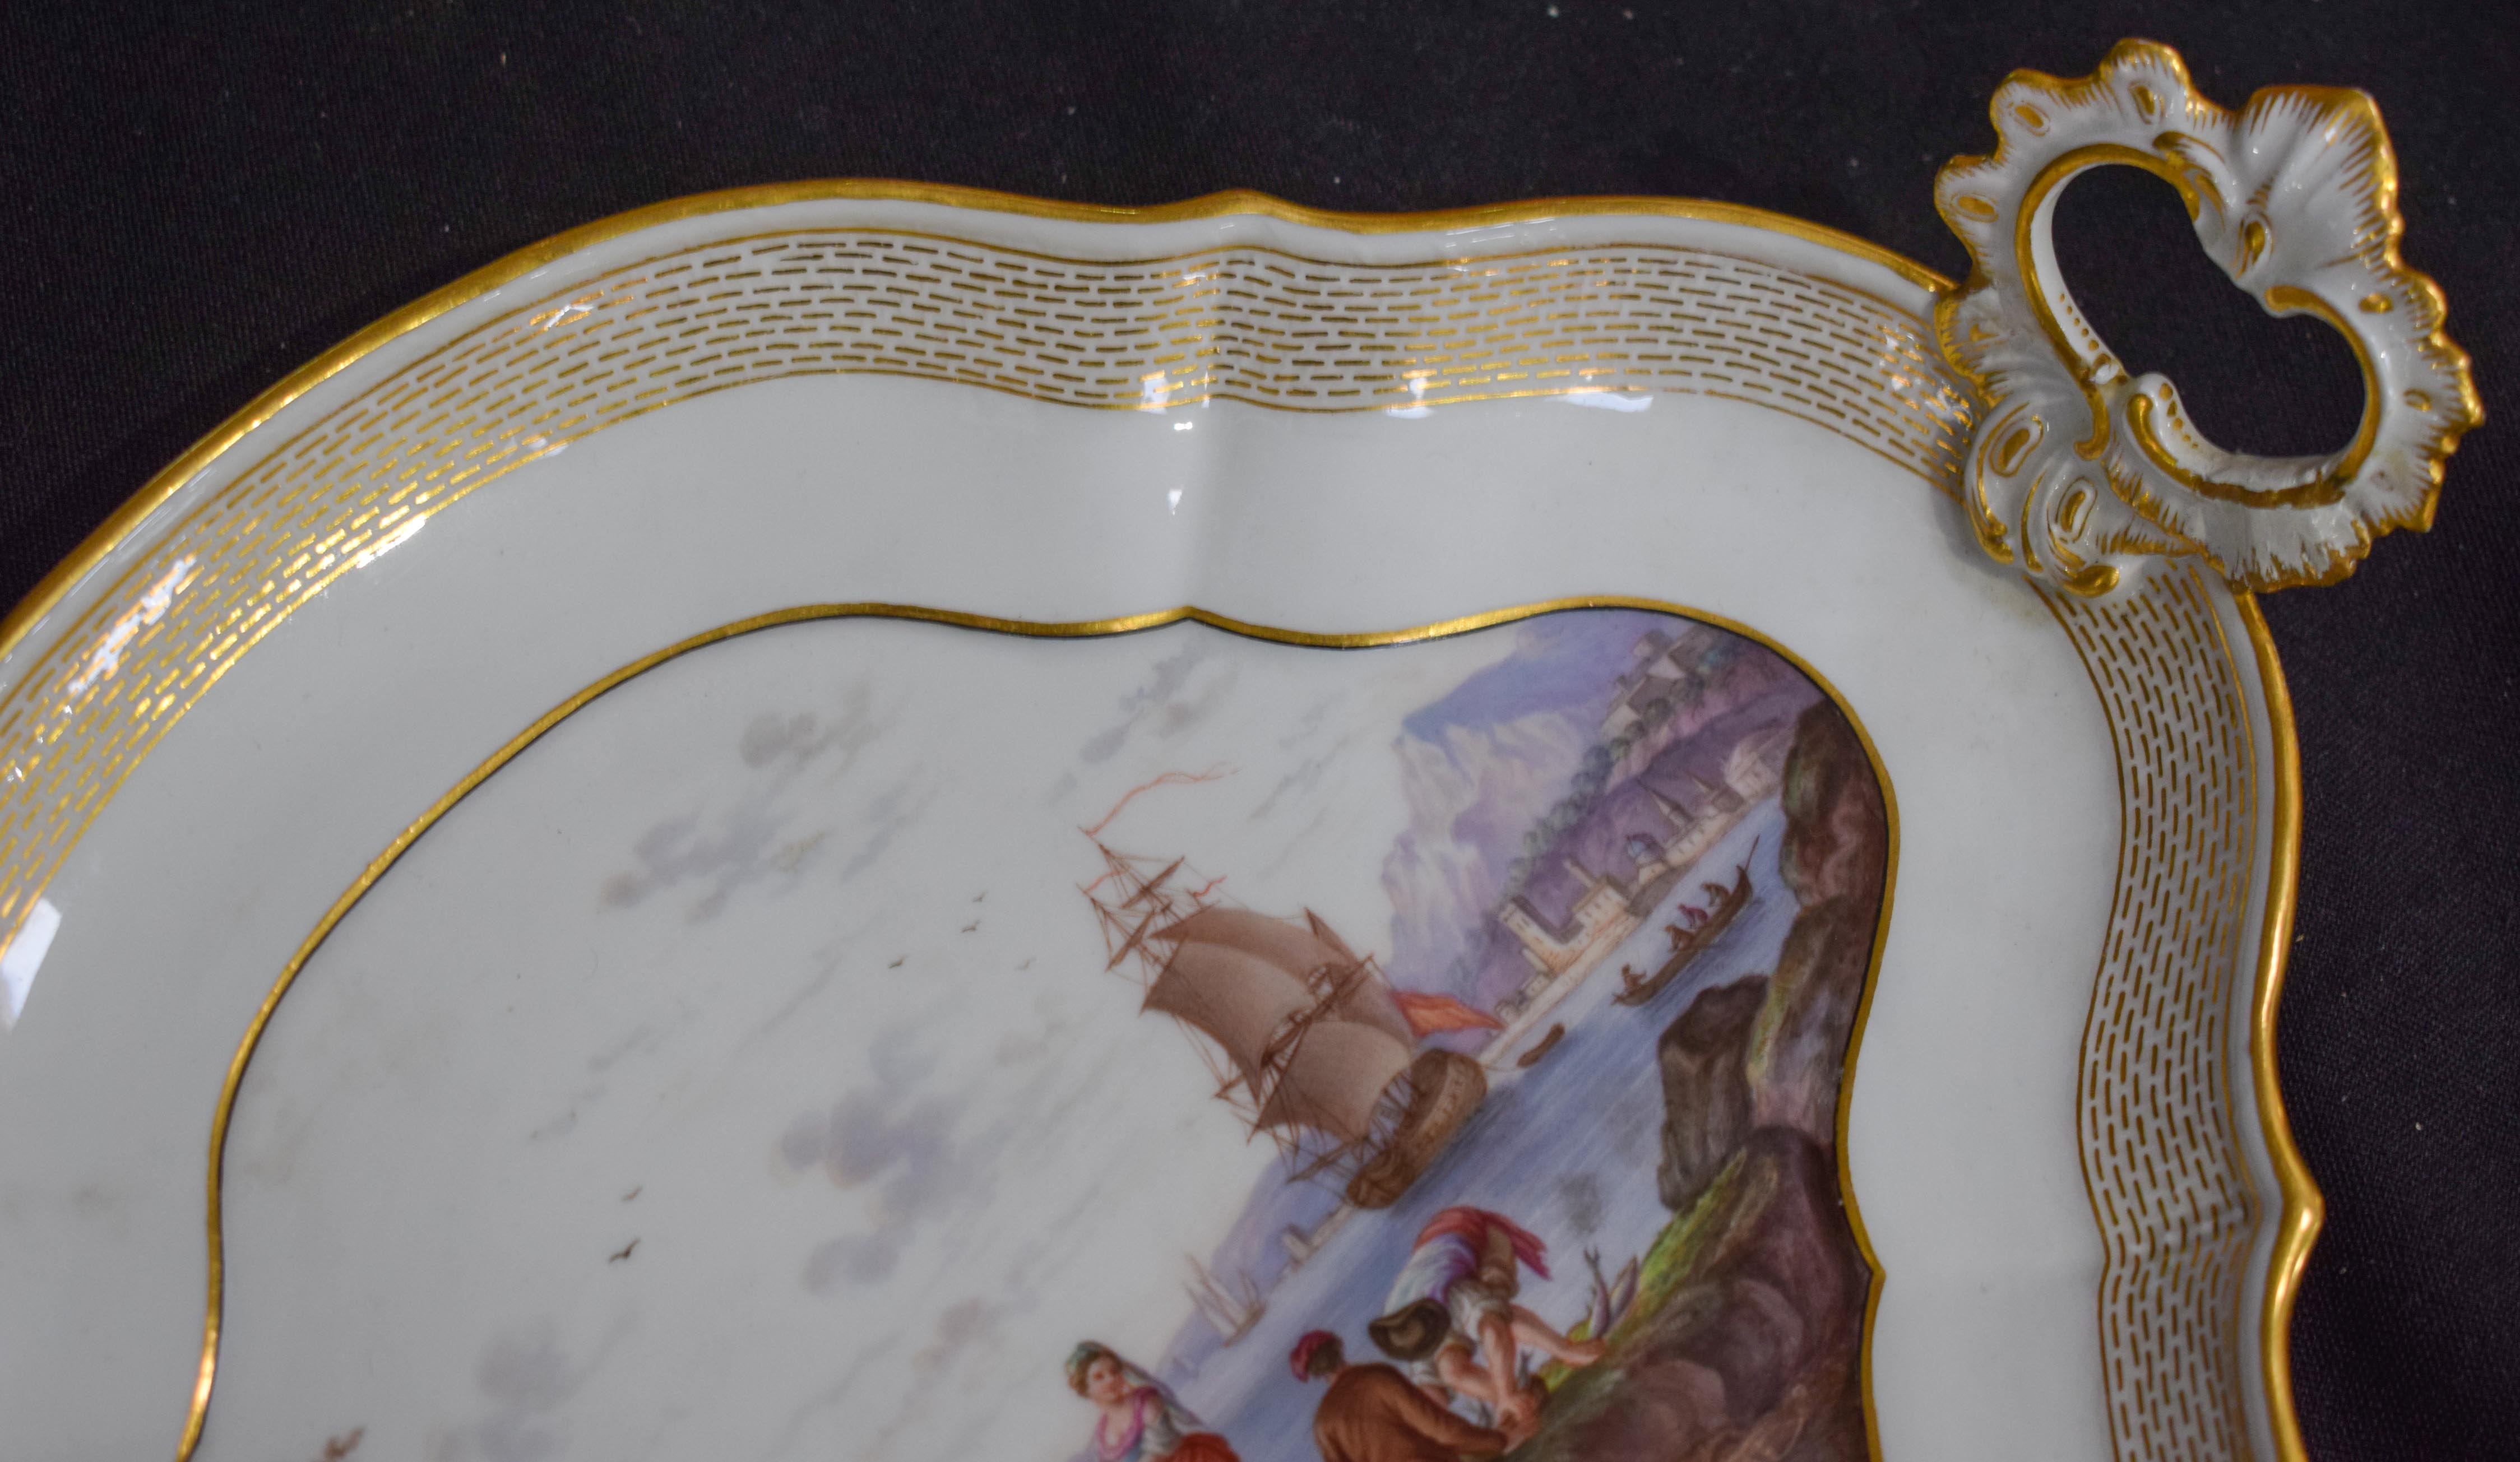 A FINE PAIR OF 18TH/19TH CENTURY MEISSEN TWIN HANDLED PORCELAIN DISHES painted with coastal views. 2 - Image 14 of 19